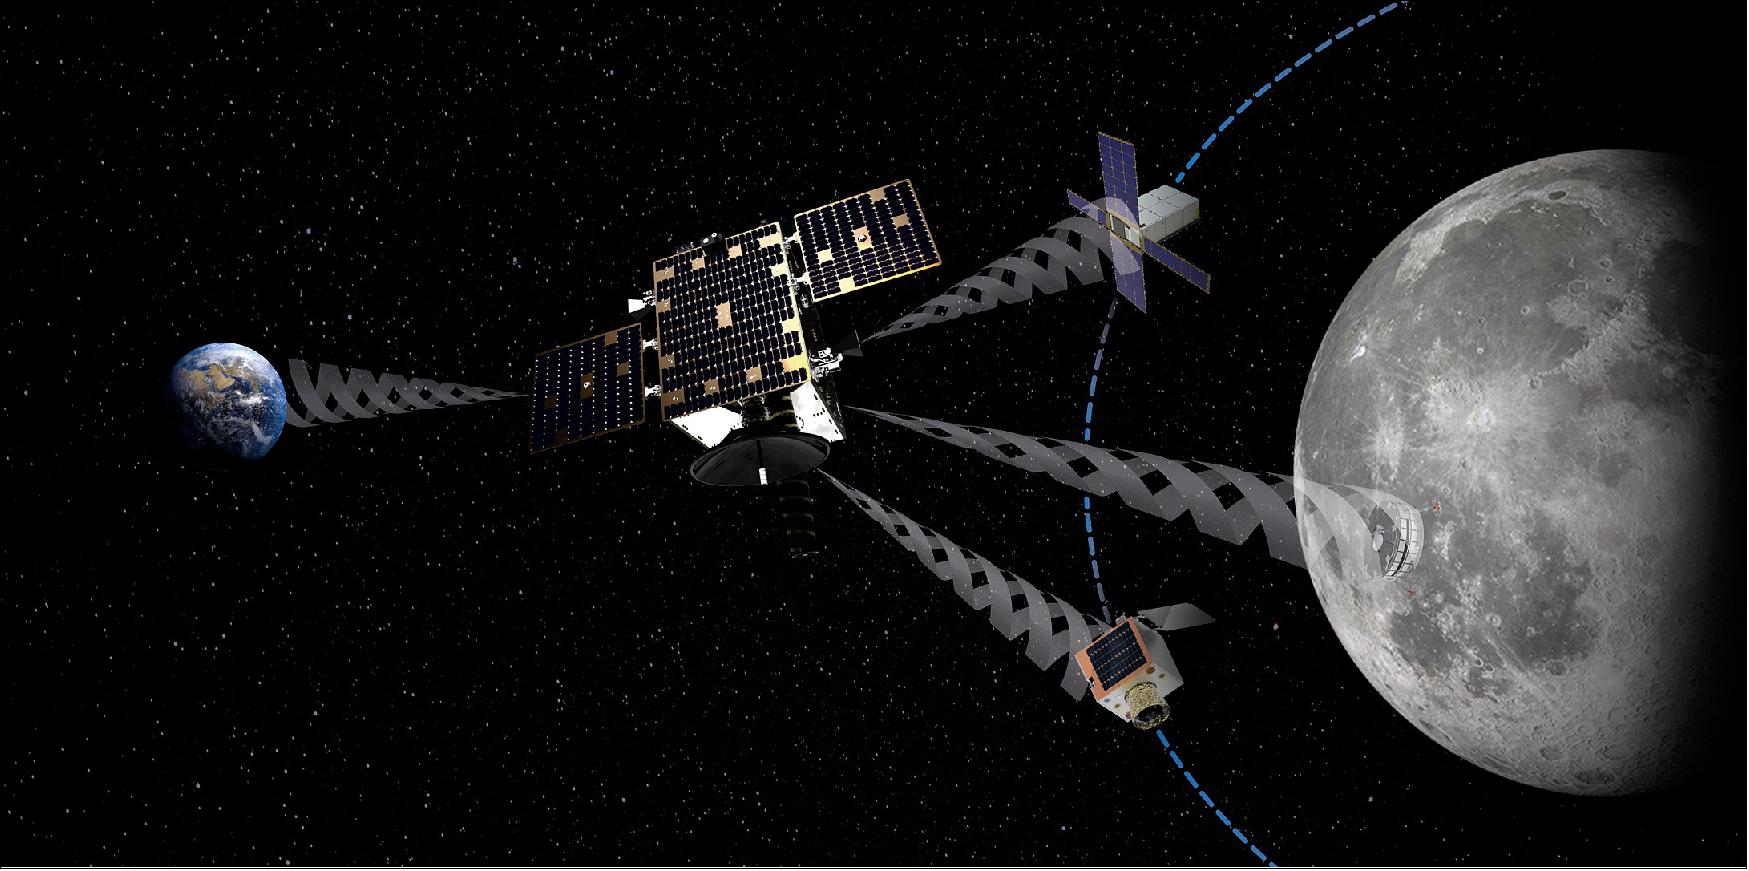 Figure 8: Lunar Ride and Phone Home Service. Surrey Satellite Technology Ltd (SSTL), Goonhilly Earth Station (GES) and the European Space Agency (ESA) have signed a collaboration agreement for Commercial Lunar Mission Support Services at the Space Symposium in Colorado Springs today. This innovative commercial partnership for exploration aims to develop a European lunar telecommunications and navigation infrastructure, including the delivery of payloads and nanosats to lunar orbit (image credit: SSTL)